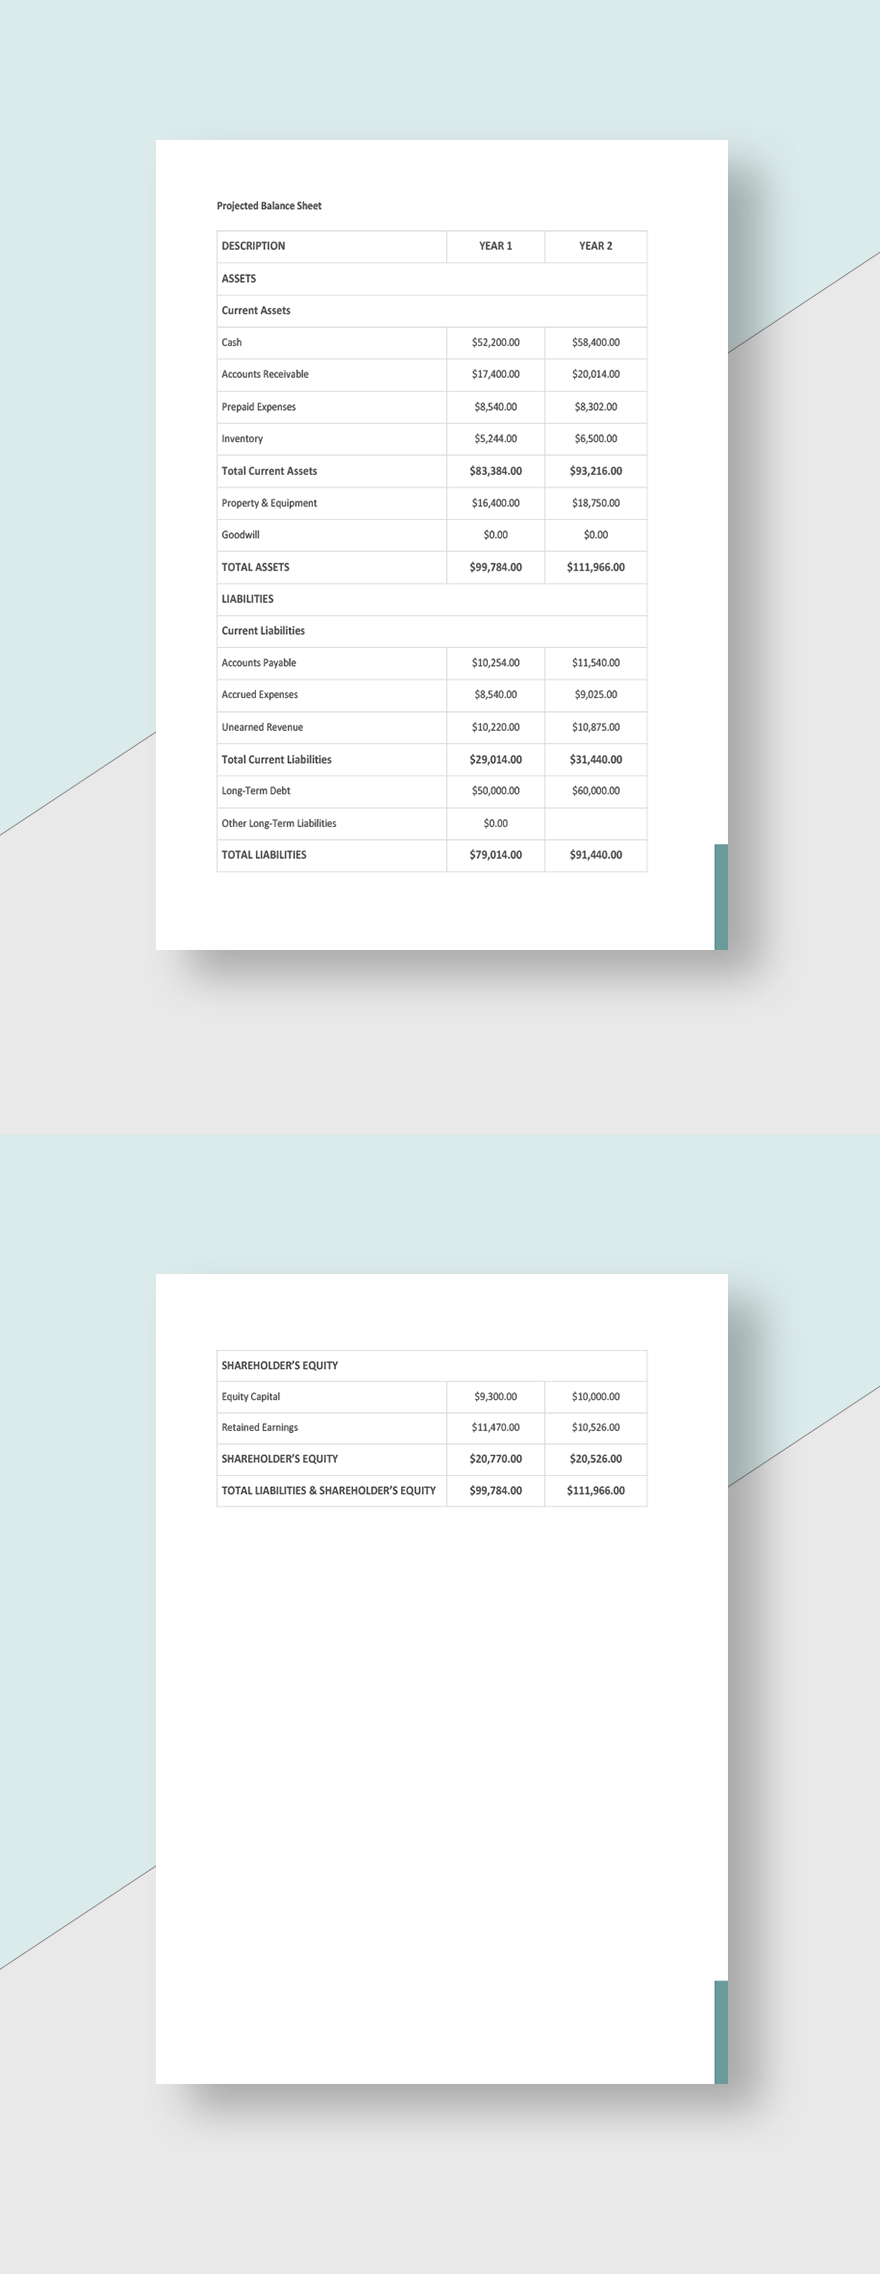 Professional Advertising Agency Business Plan Template